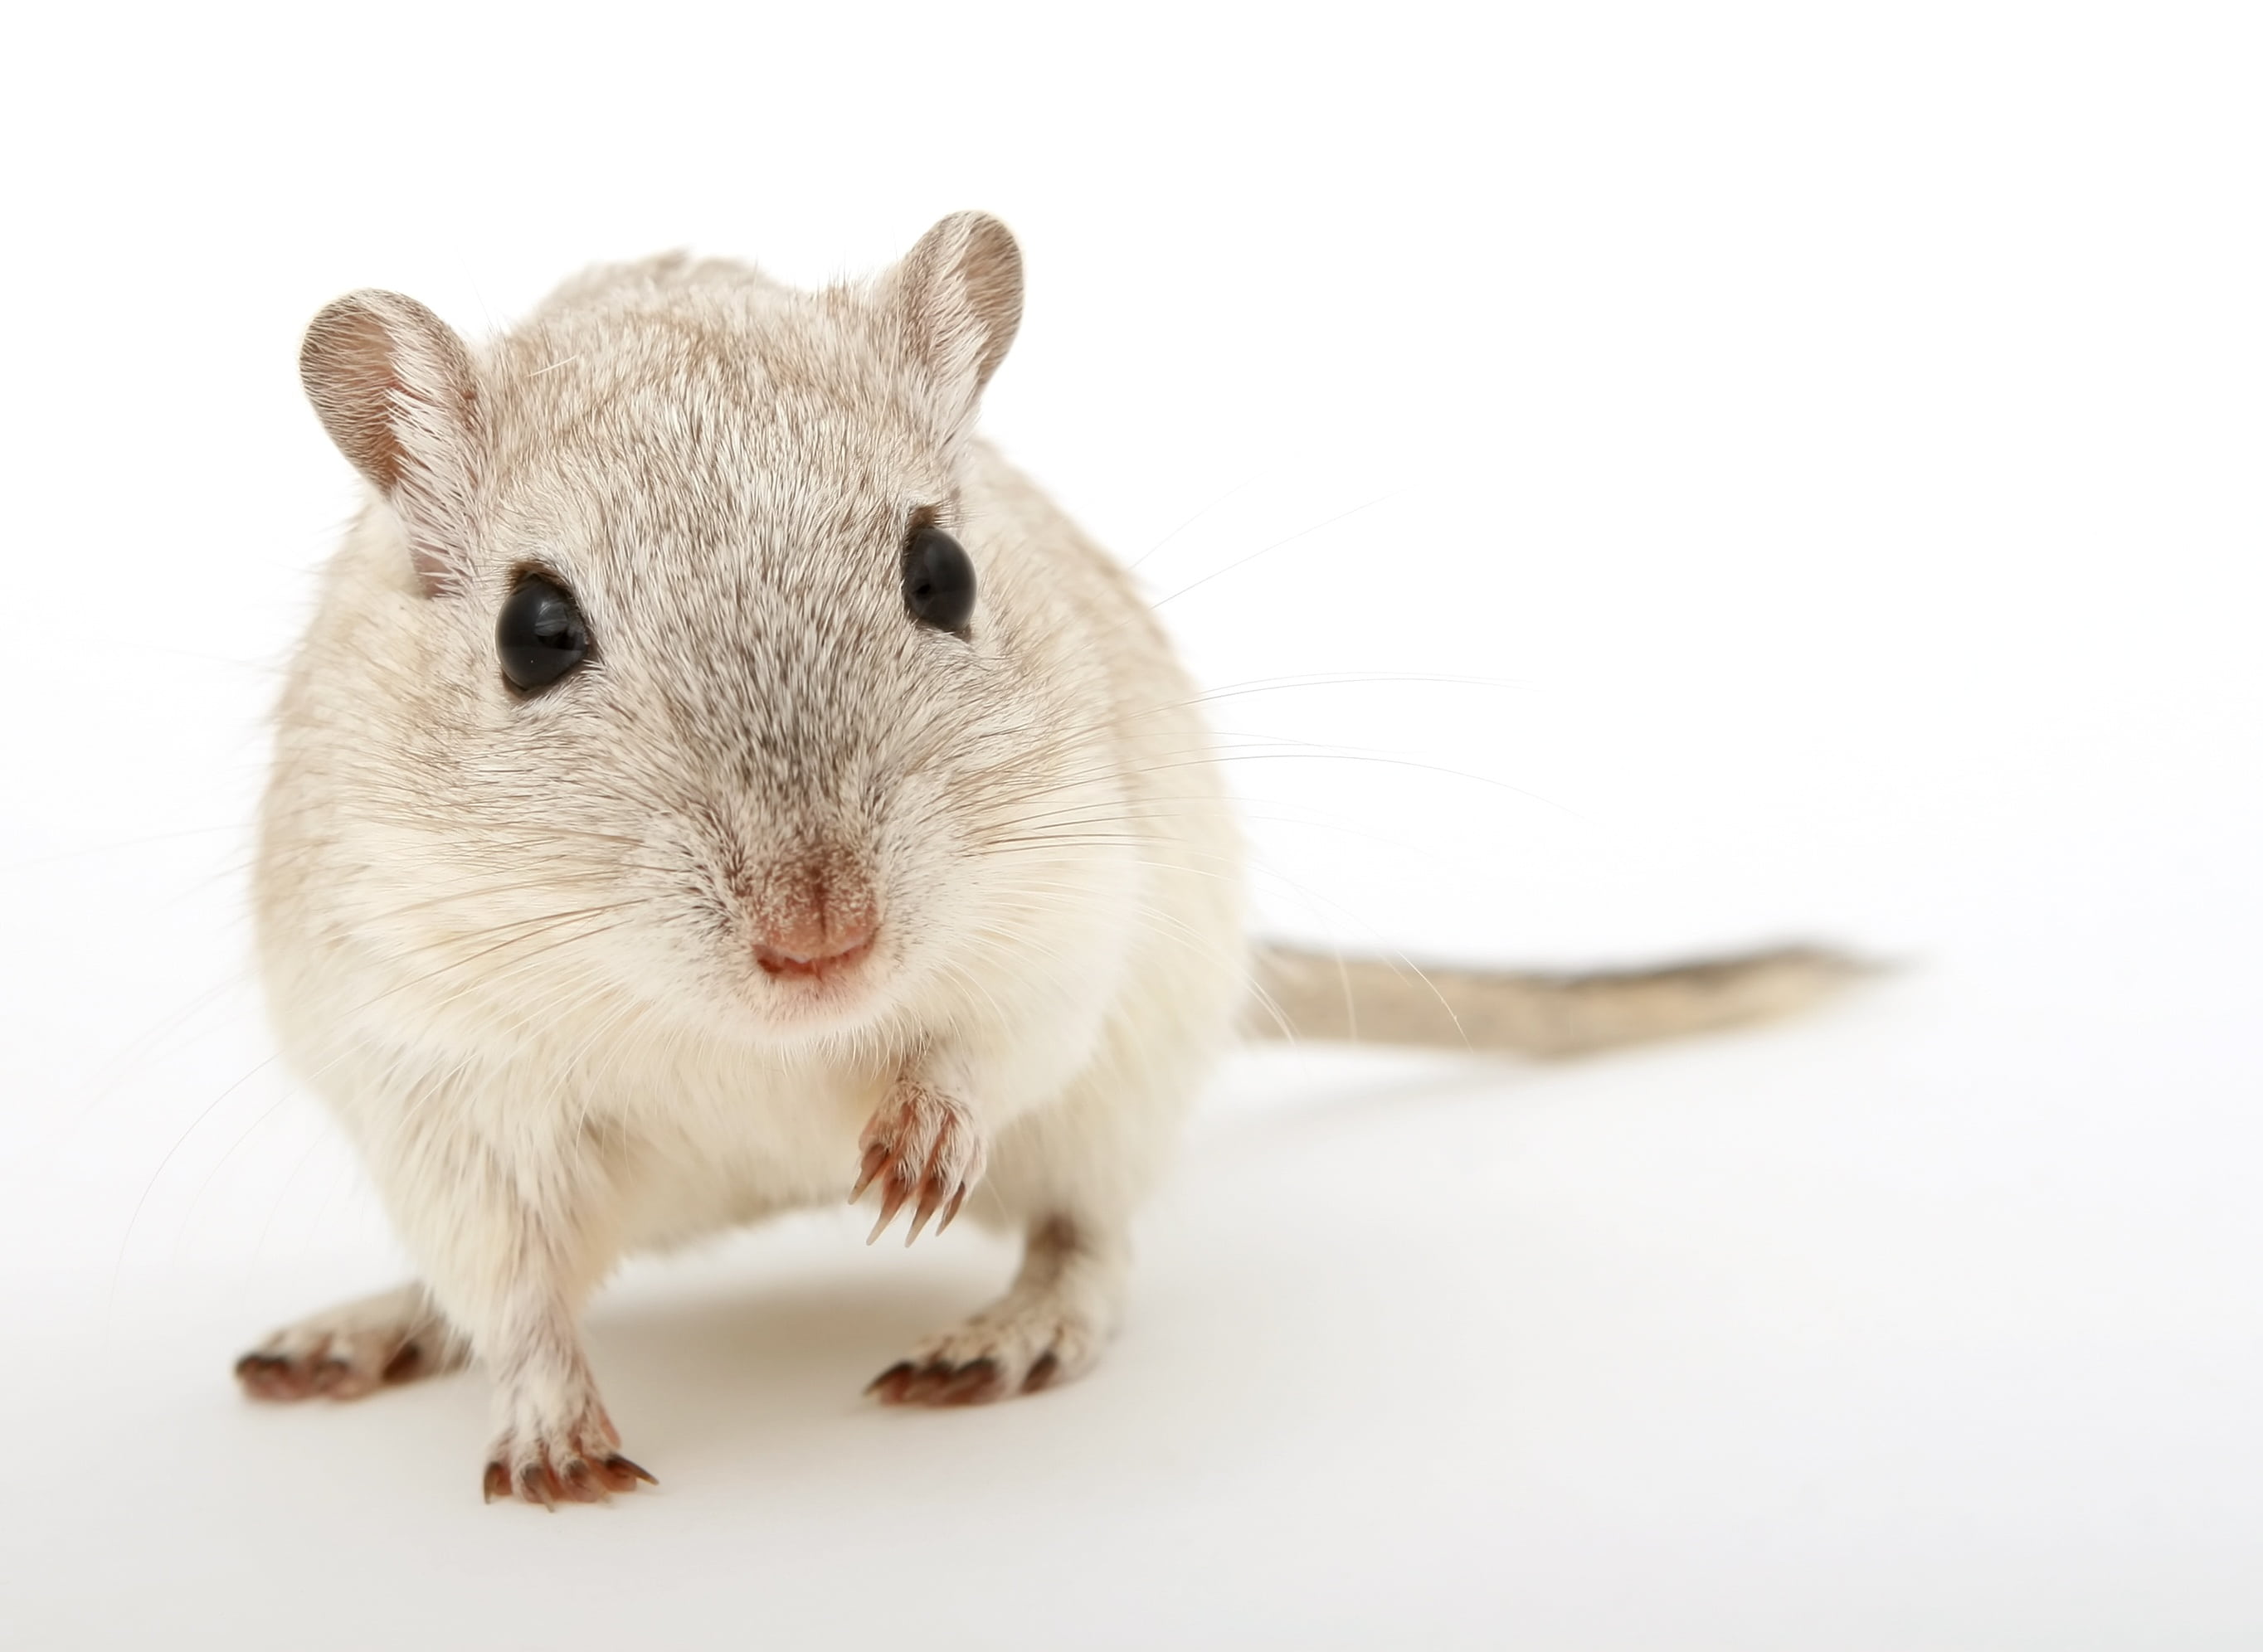 beige hamster on white surface, animal, attractive, beautiful